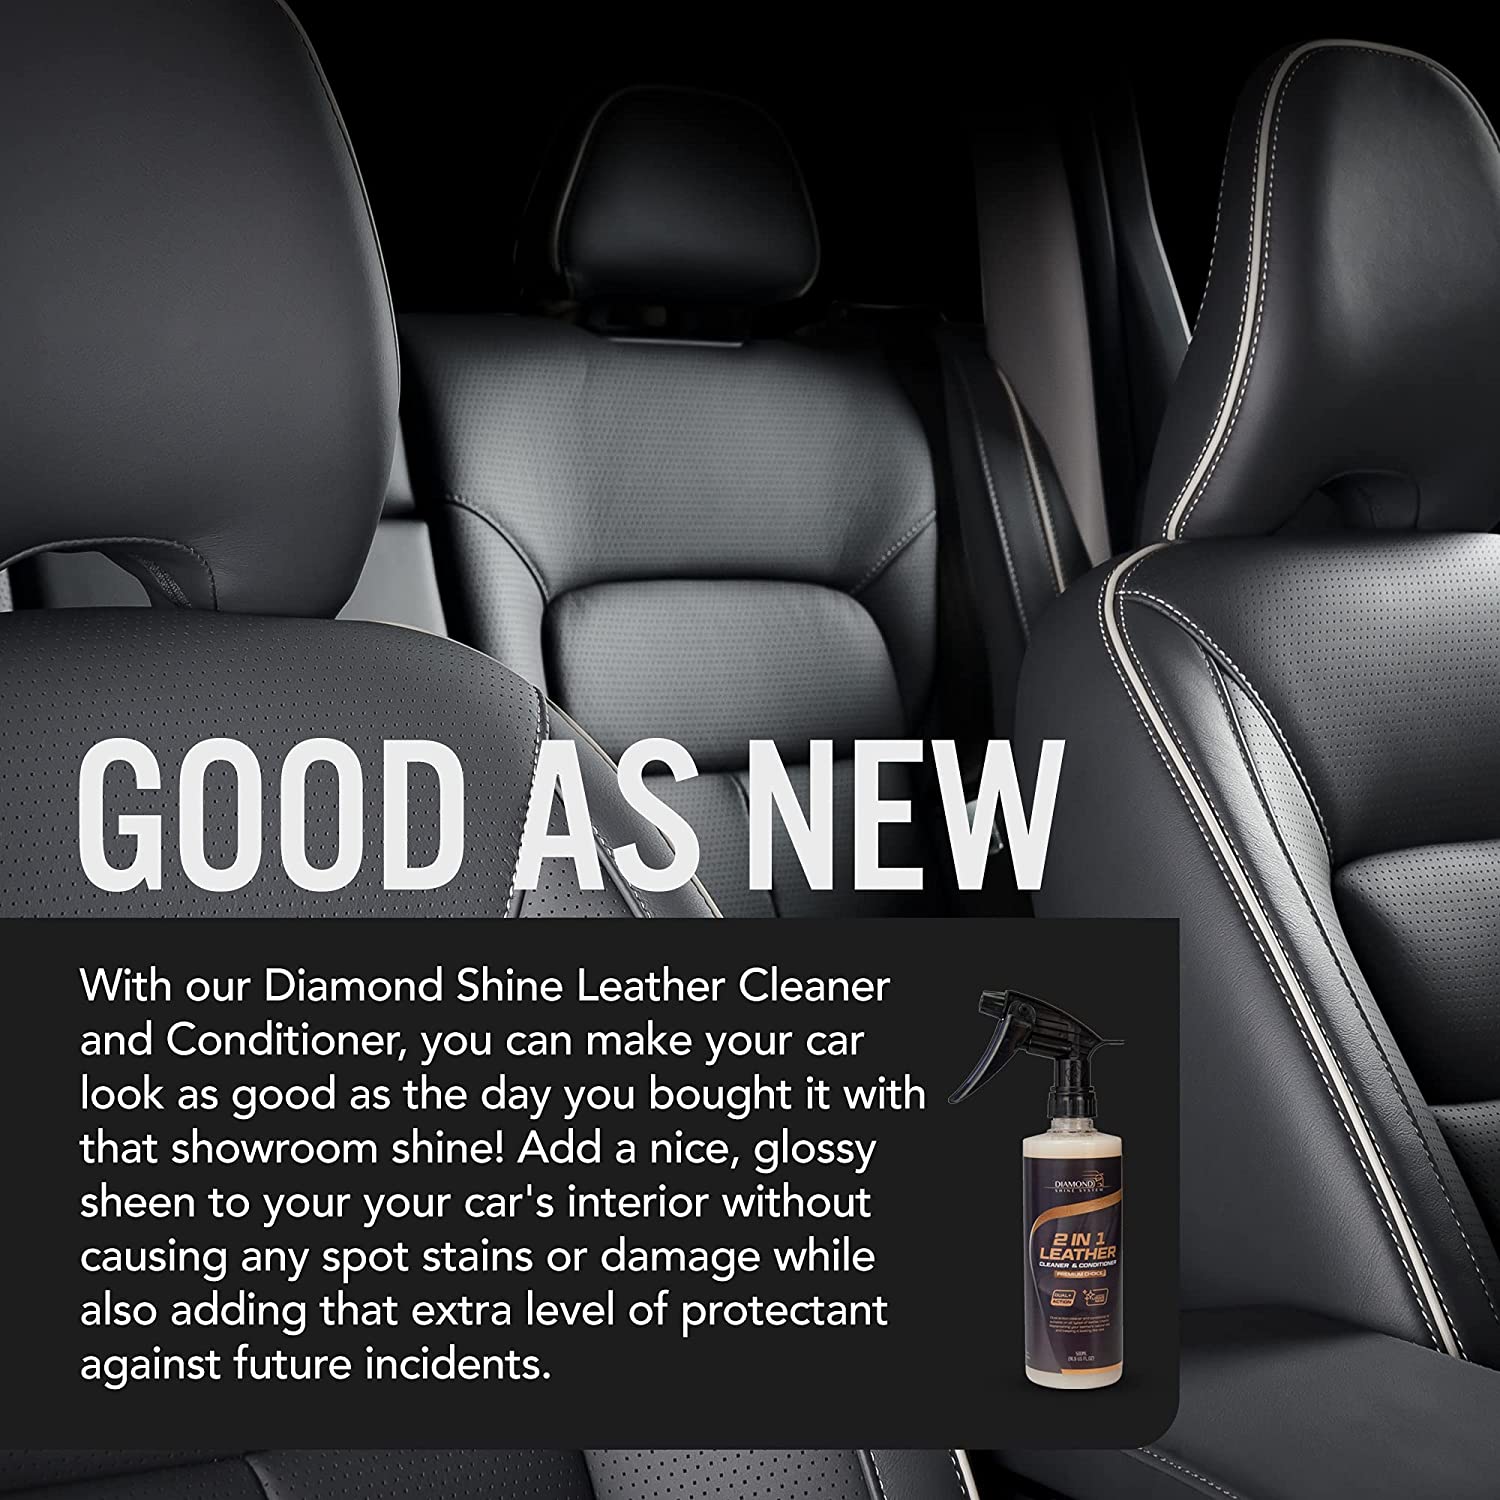 Diamond Shine System Leather Cleaner and Conditioner with Microfibre Cloth and Two Applicator Pads